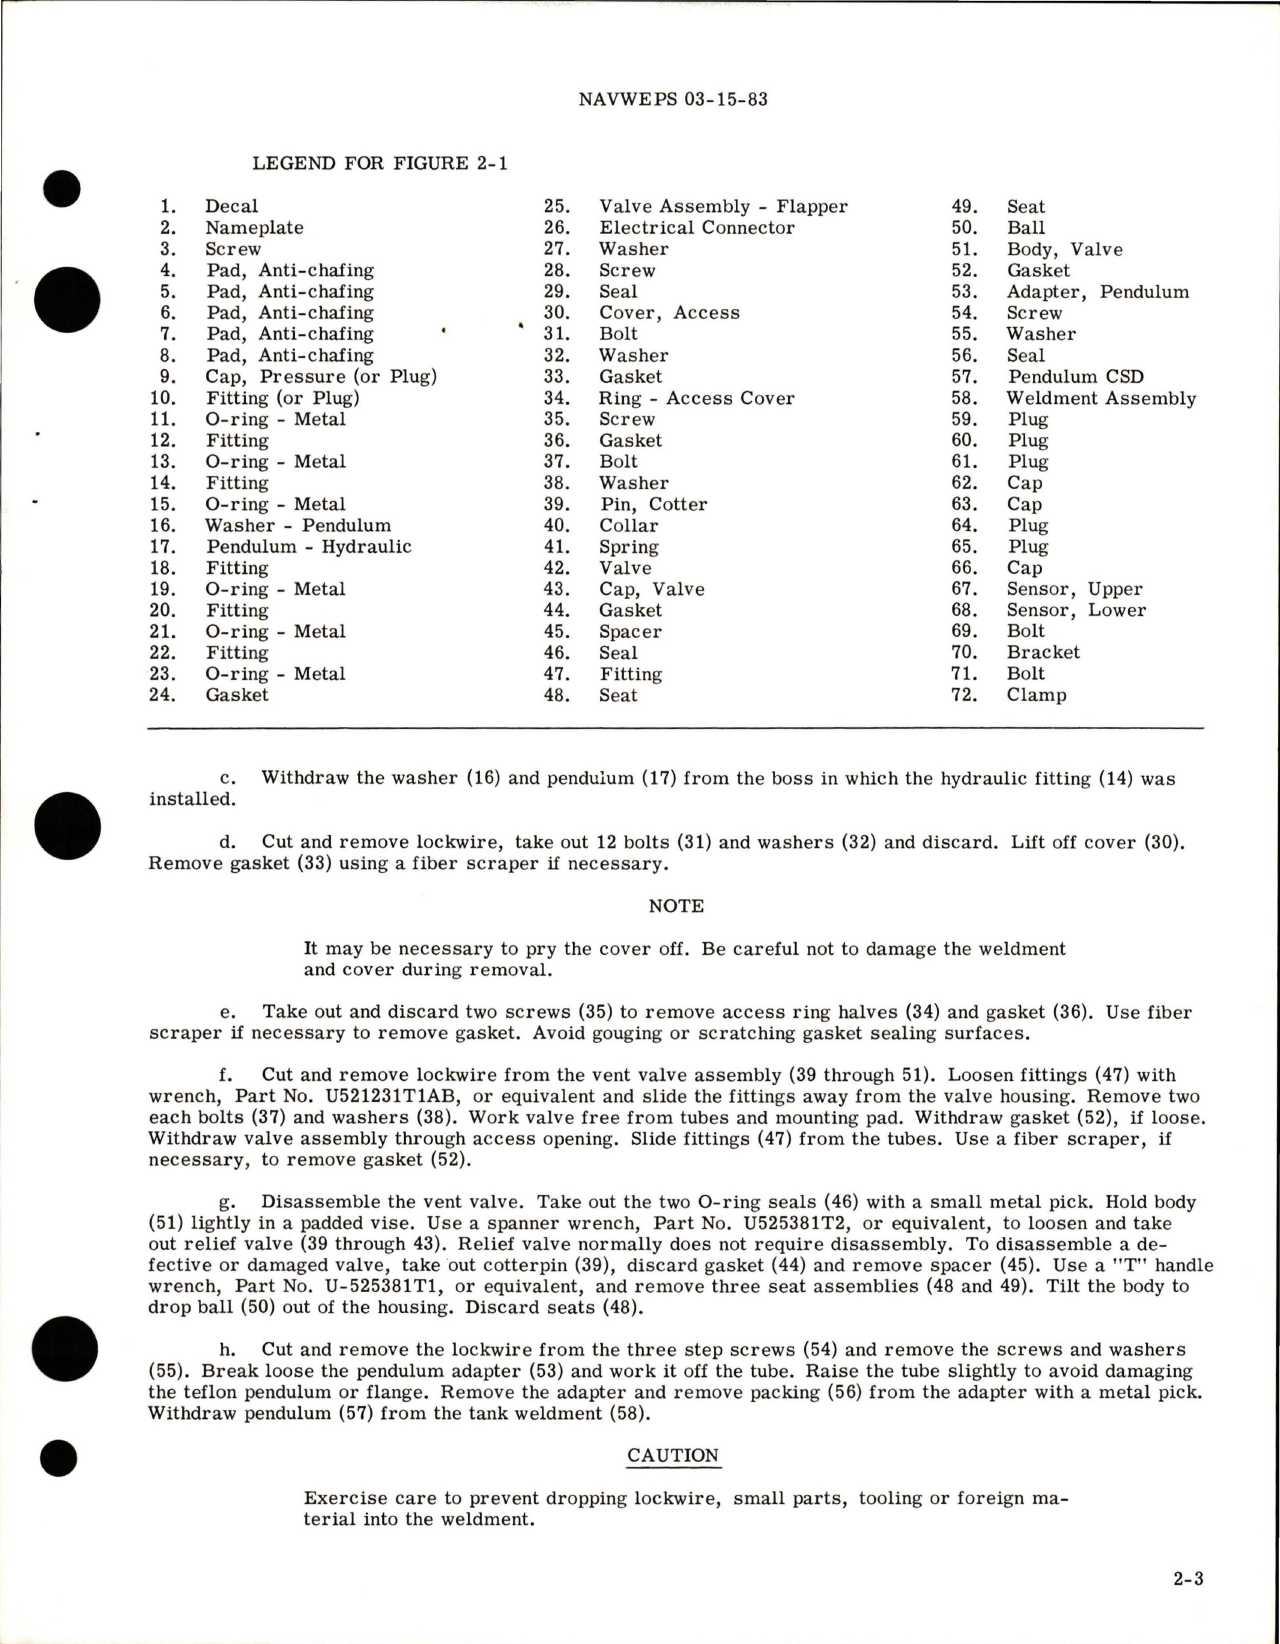 Sample page 9 from AirCorps Library document: Overhaul for Oil Tank and Sensor Assembly